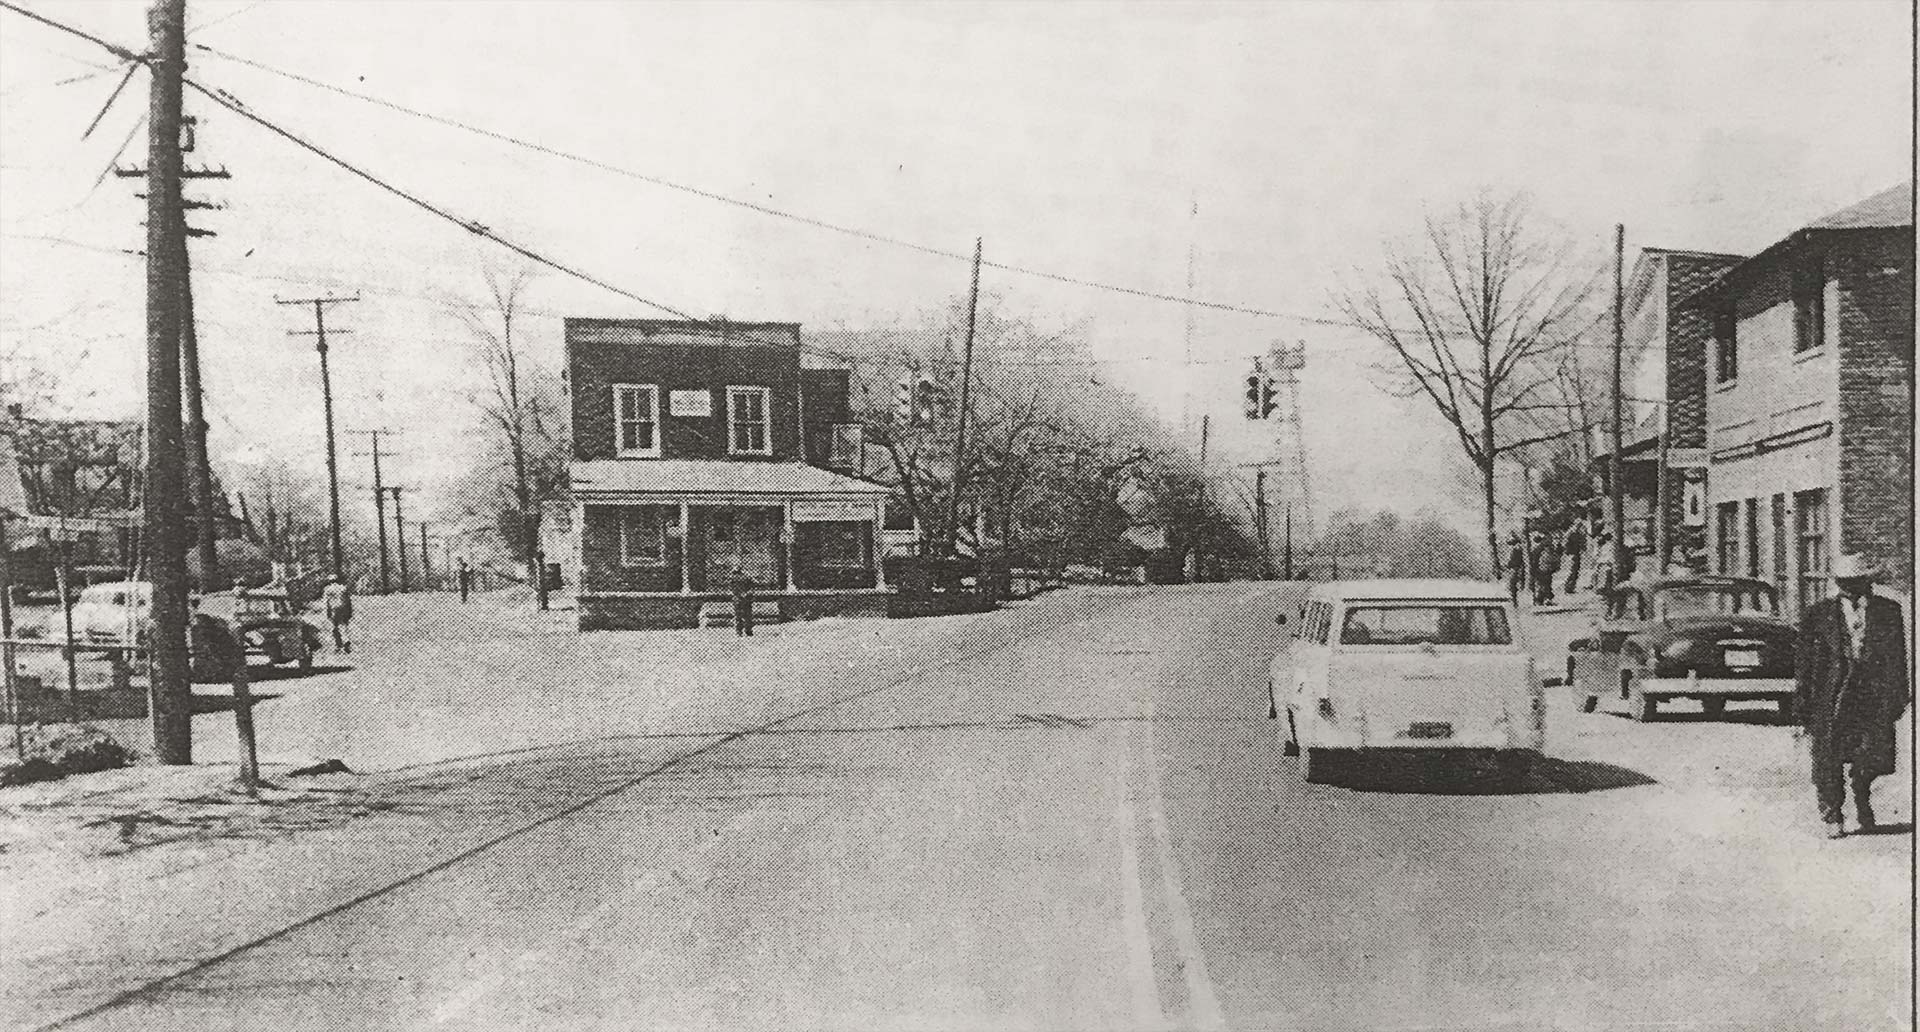 Hall's Hill 1950s